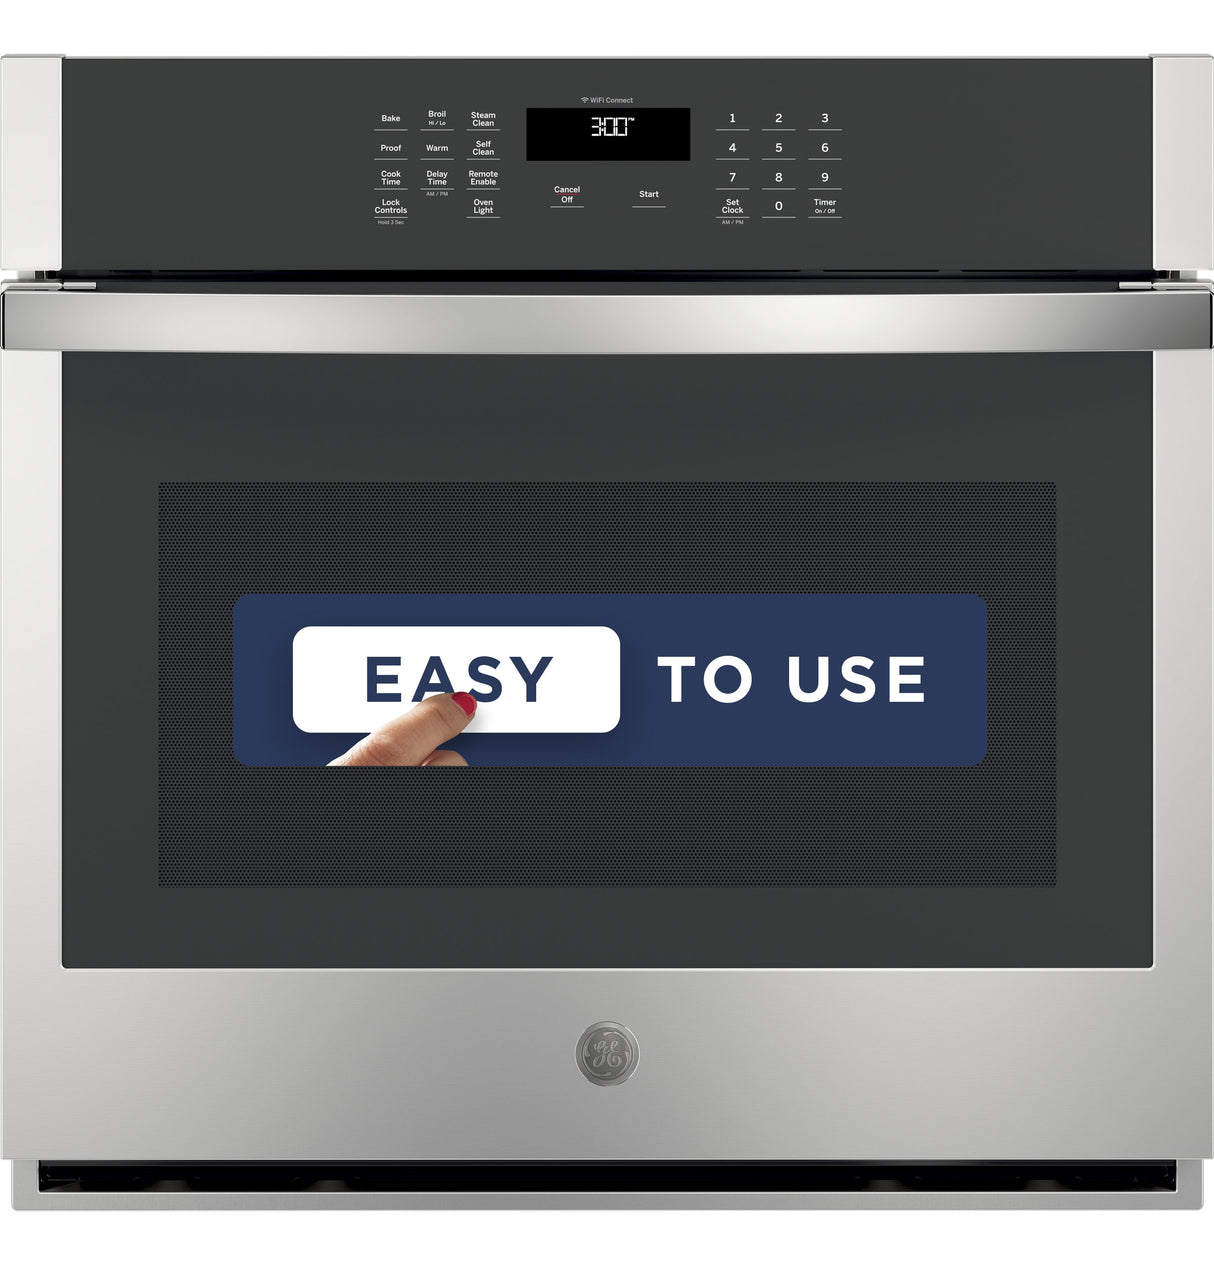 GE(R) 30" Smart Built-In Self-Clean Single Wall Oven with Never-Scrub Racks - (JTS3000SNSS)